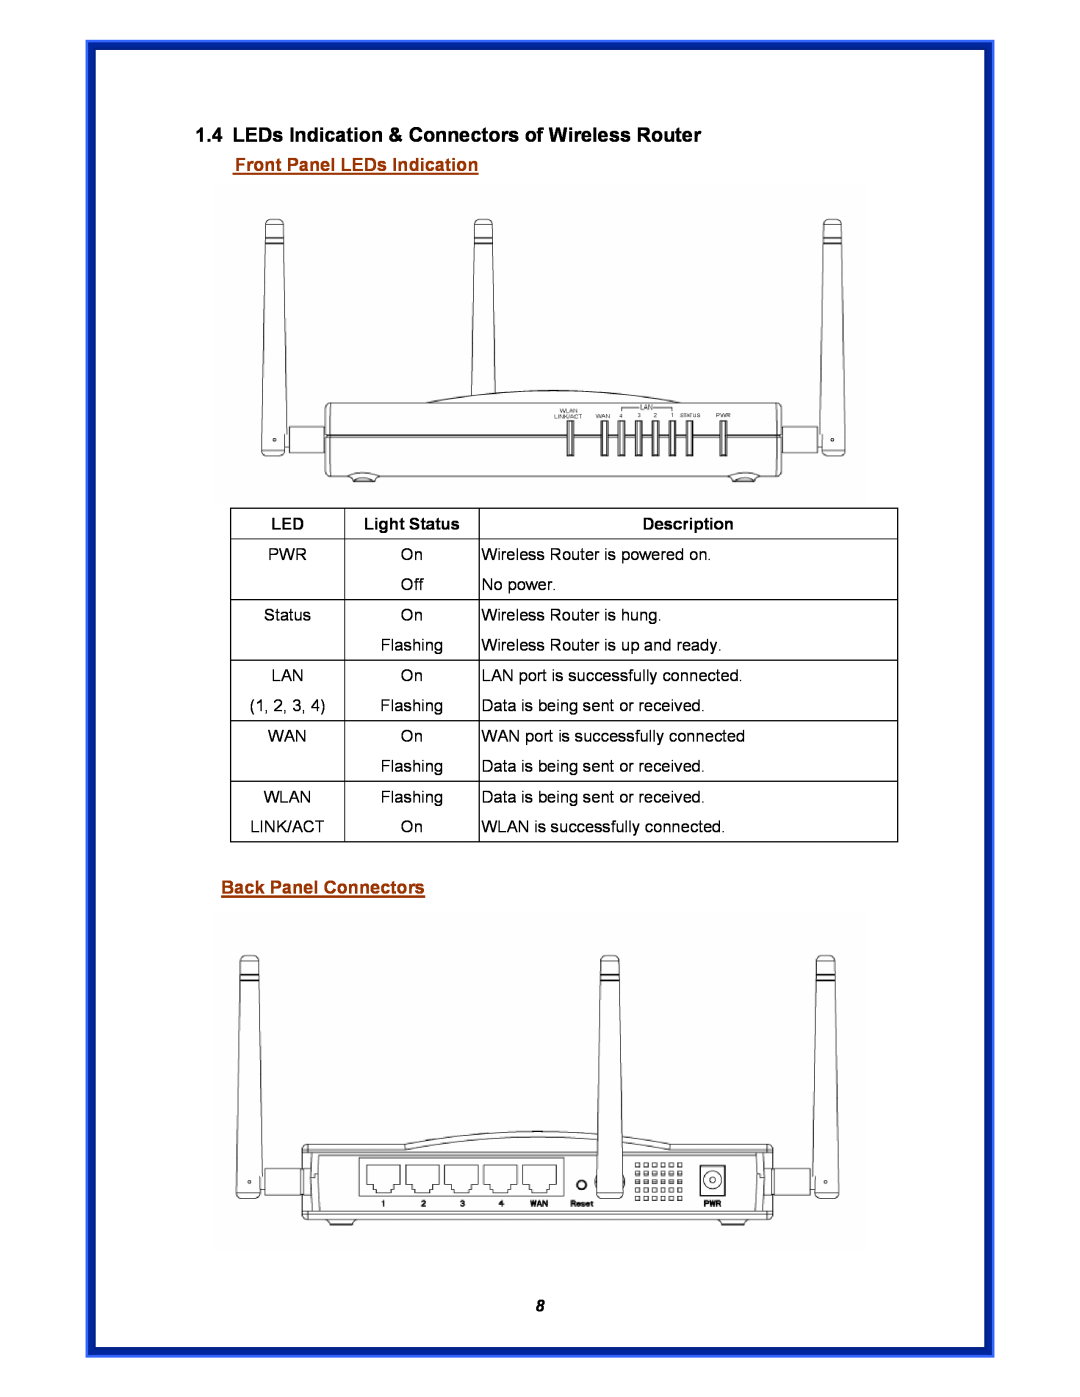 Advantek Networks AWR-MIMO-54RA LEDs Indication & Connectors of Wireless Router, Front Panel LEDs Indication, Light Status 